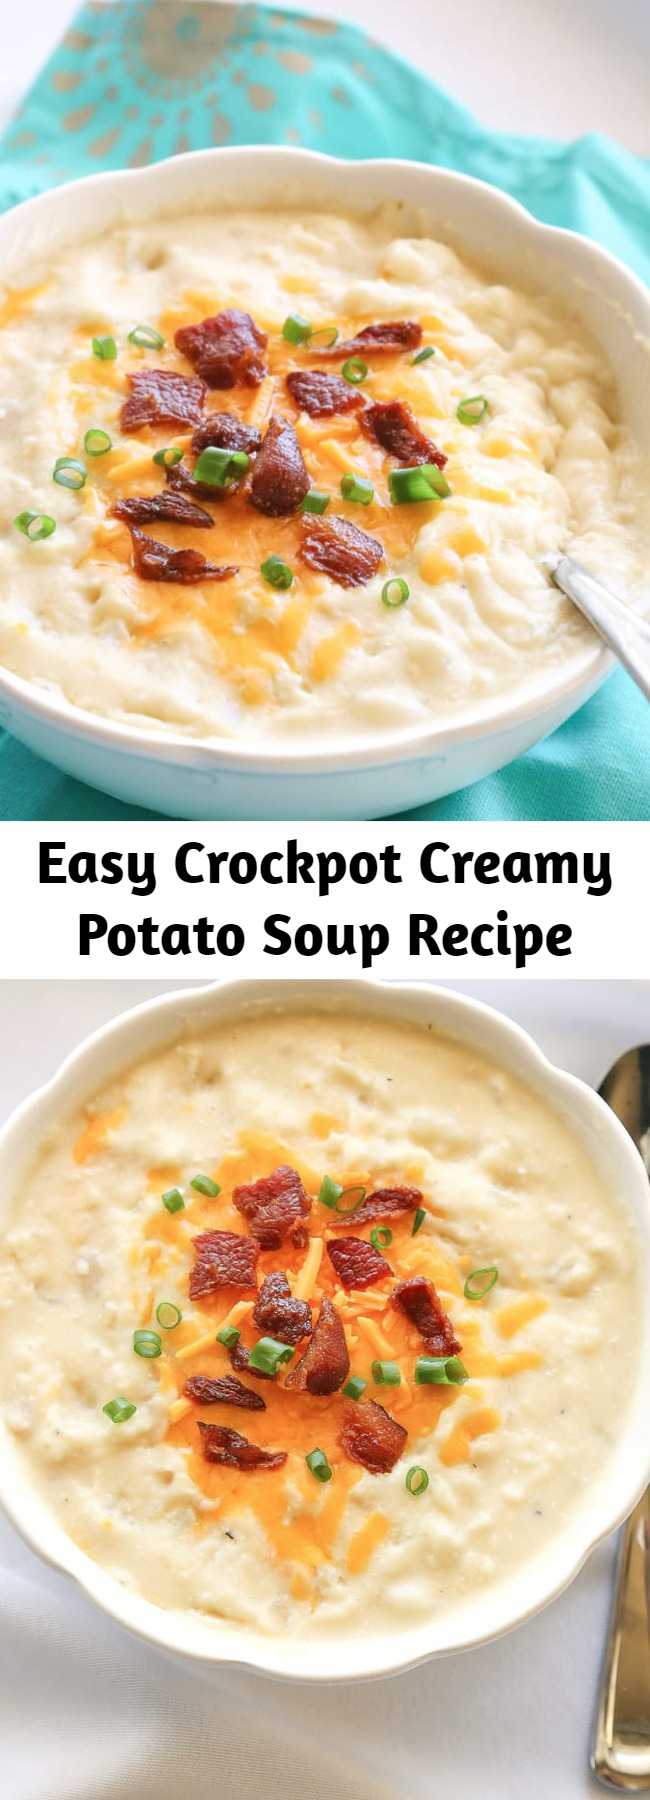 Easy Crockpot Creamy Potato Soup Recipe - This Crockpot Creamy Potato Soup couldn't be any easier. It's cooked all day in the slow cooker and is great for a cold day. Top with bacon, cheese, and green onions for the ultimate potato soup. This soup is versatile – add broccoli or ham to give it a twist. This will become your go-to crockpot potato soup recipe.